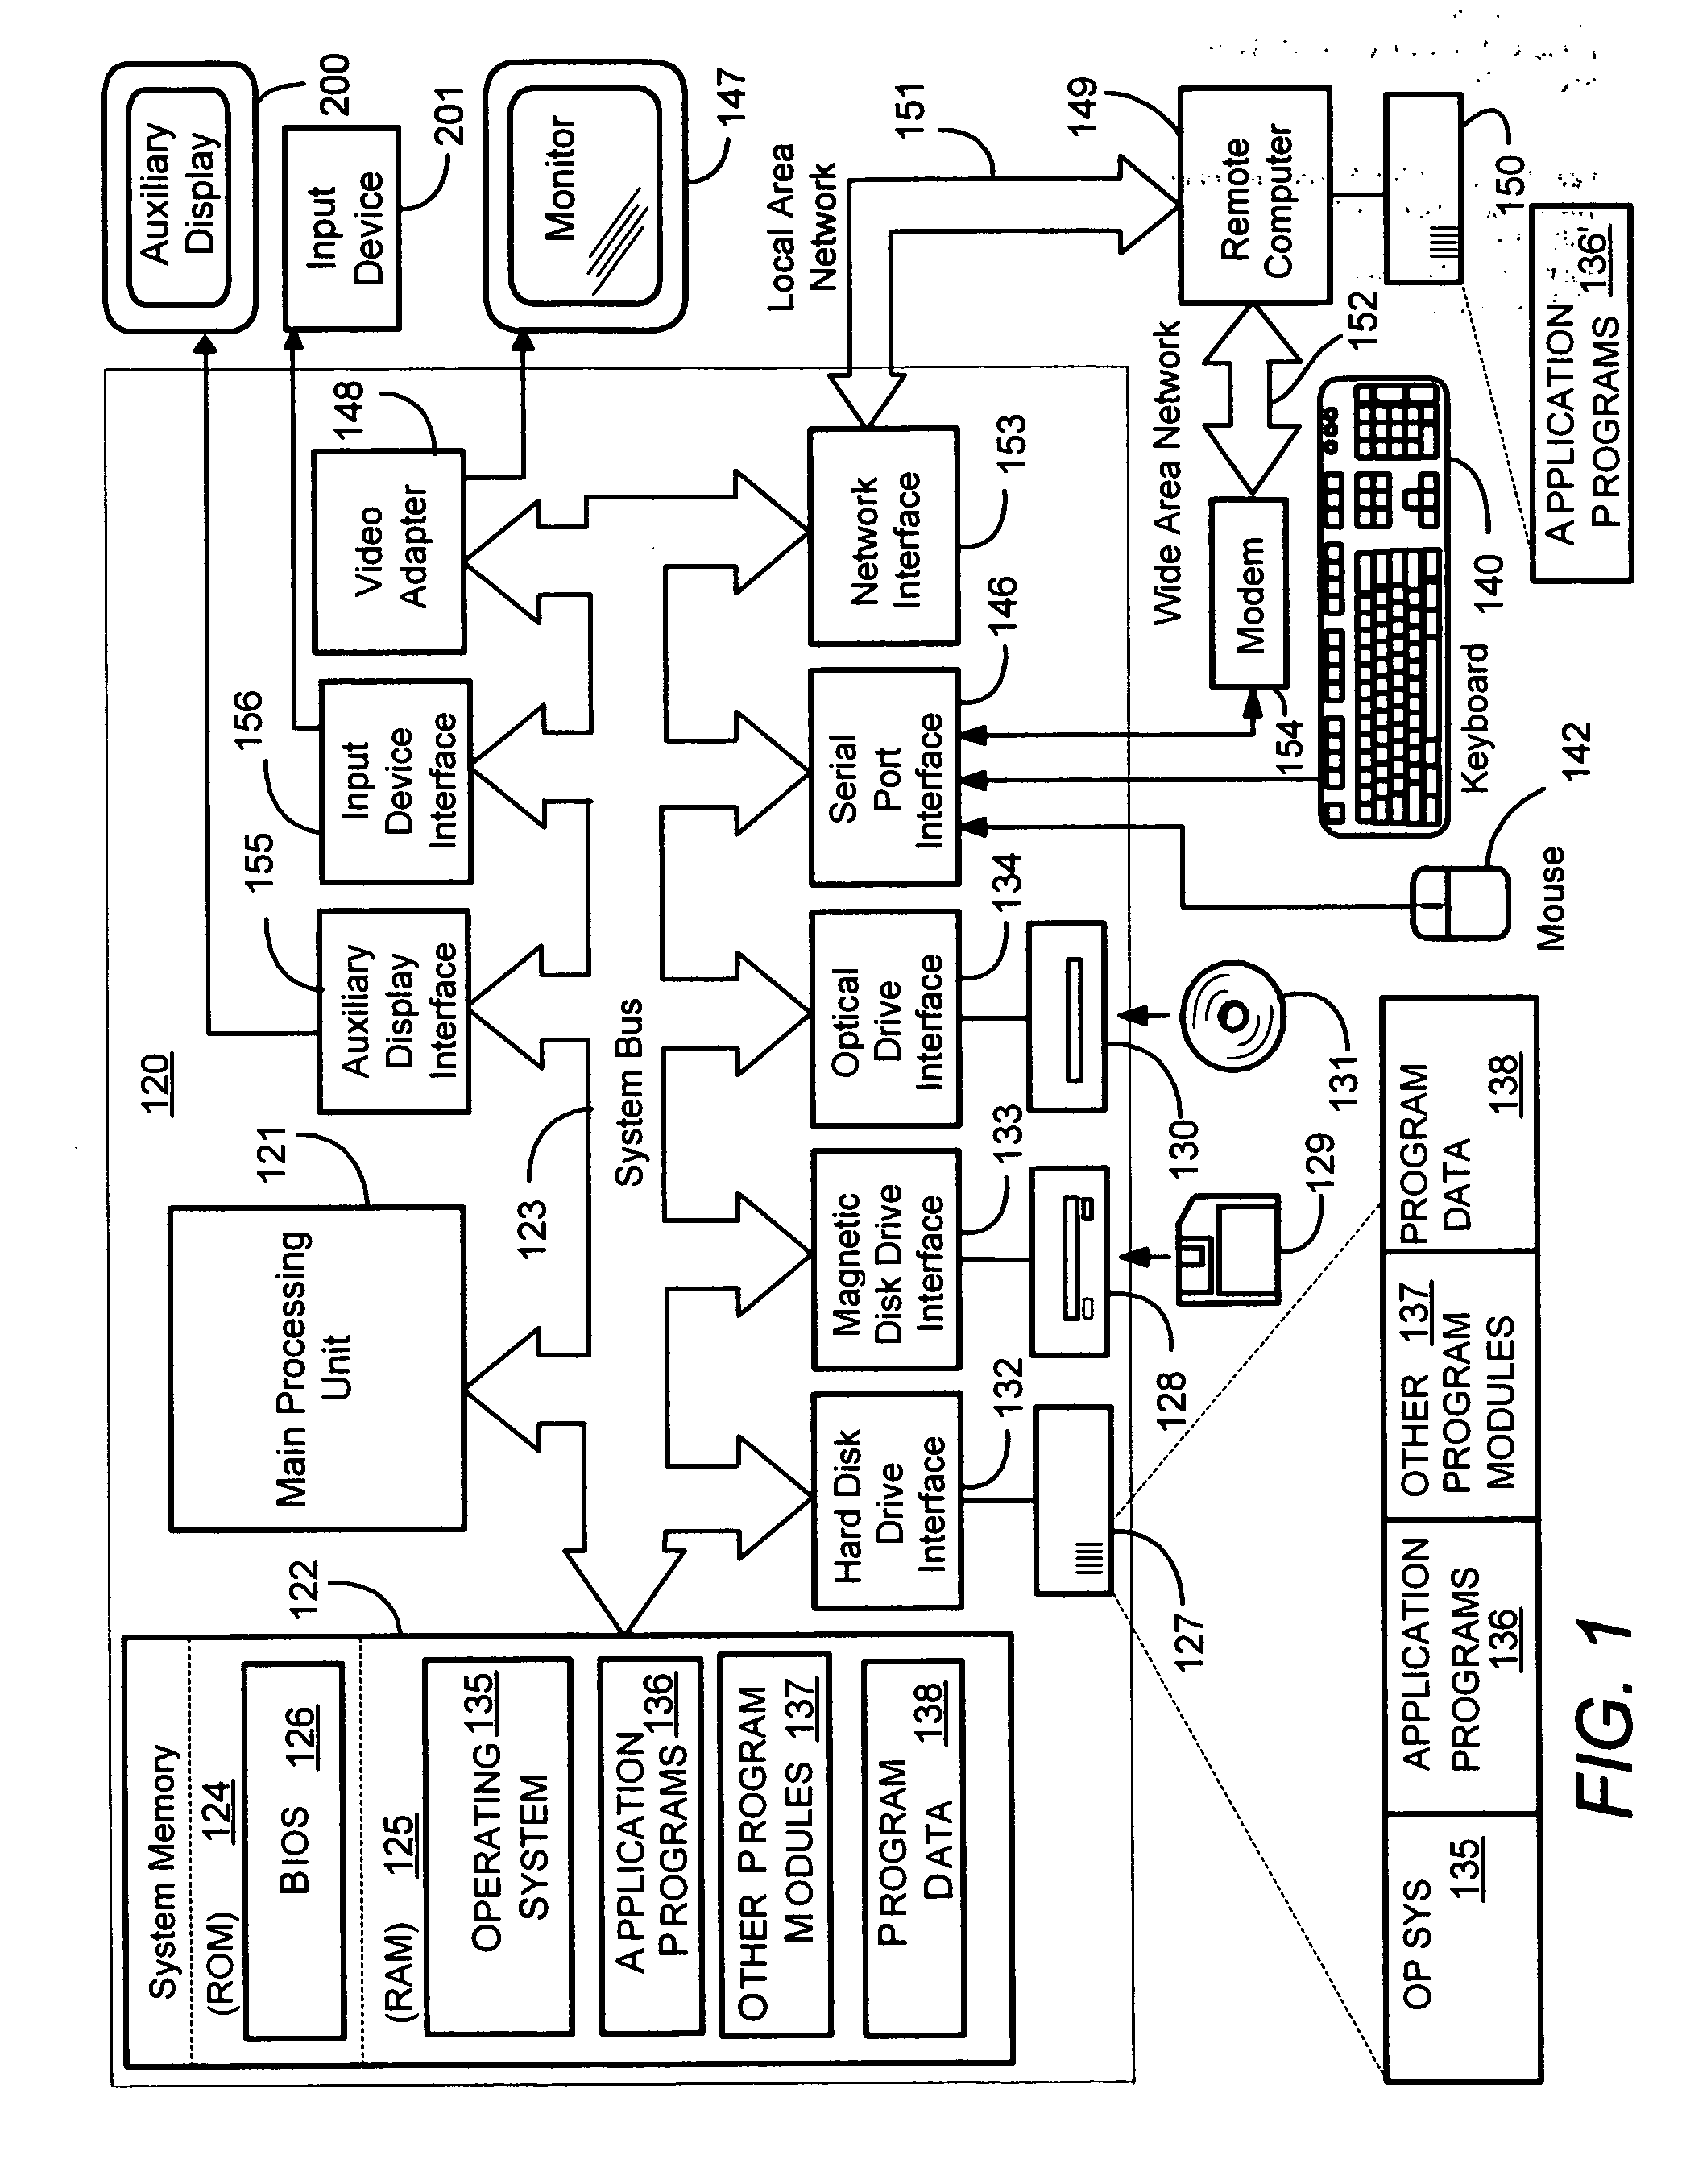 Simple content format for auxiliary display devices